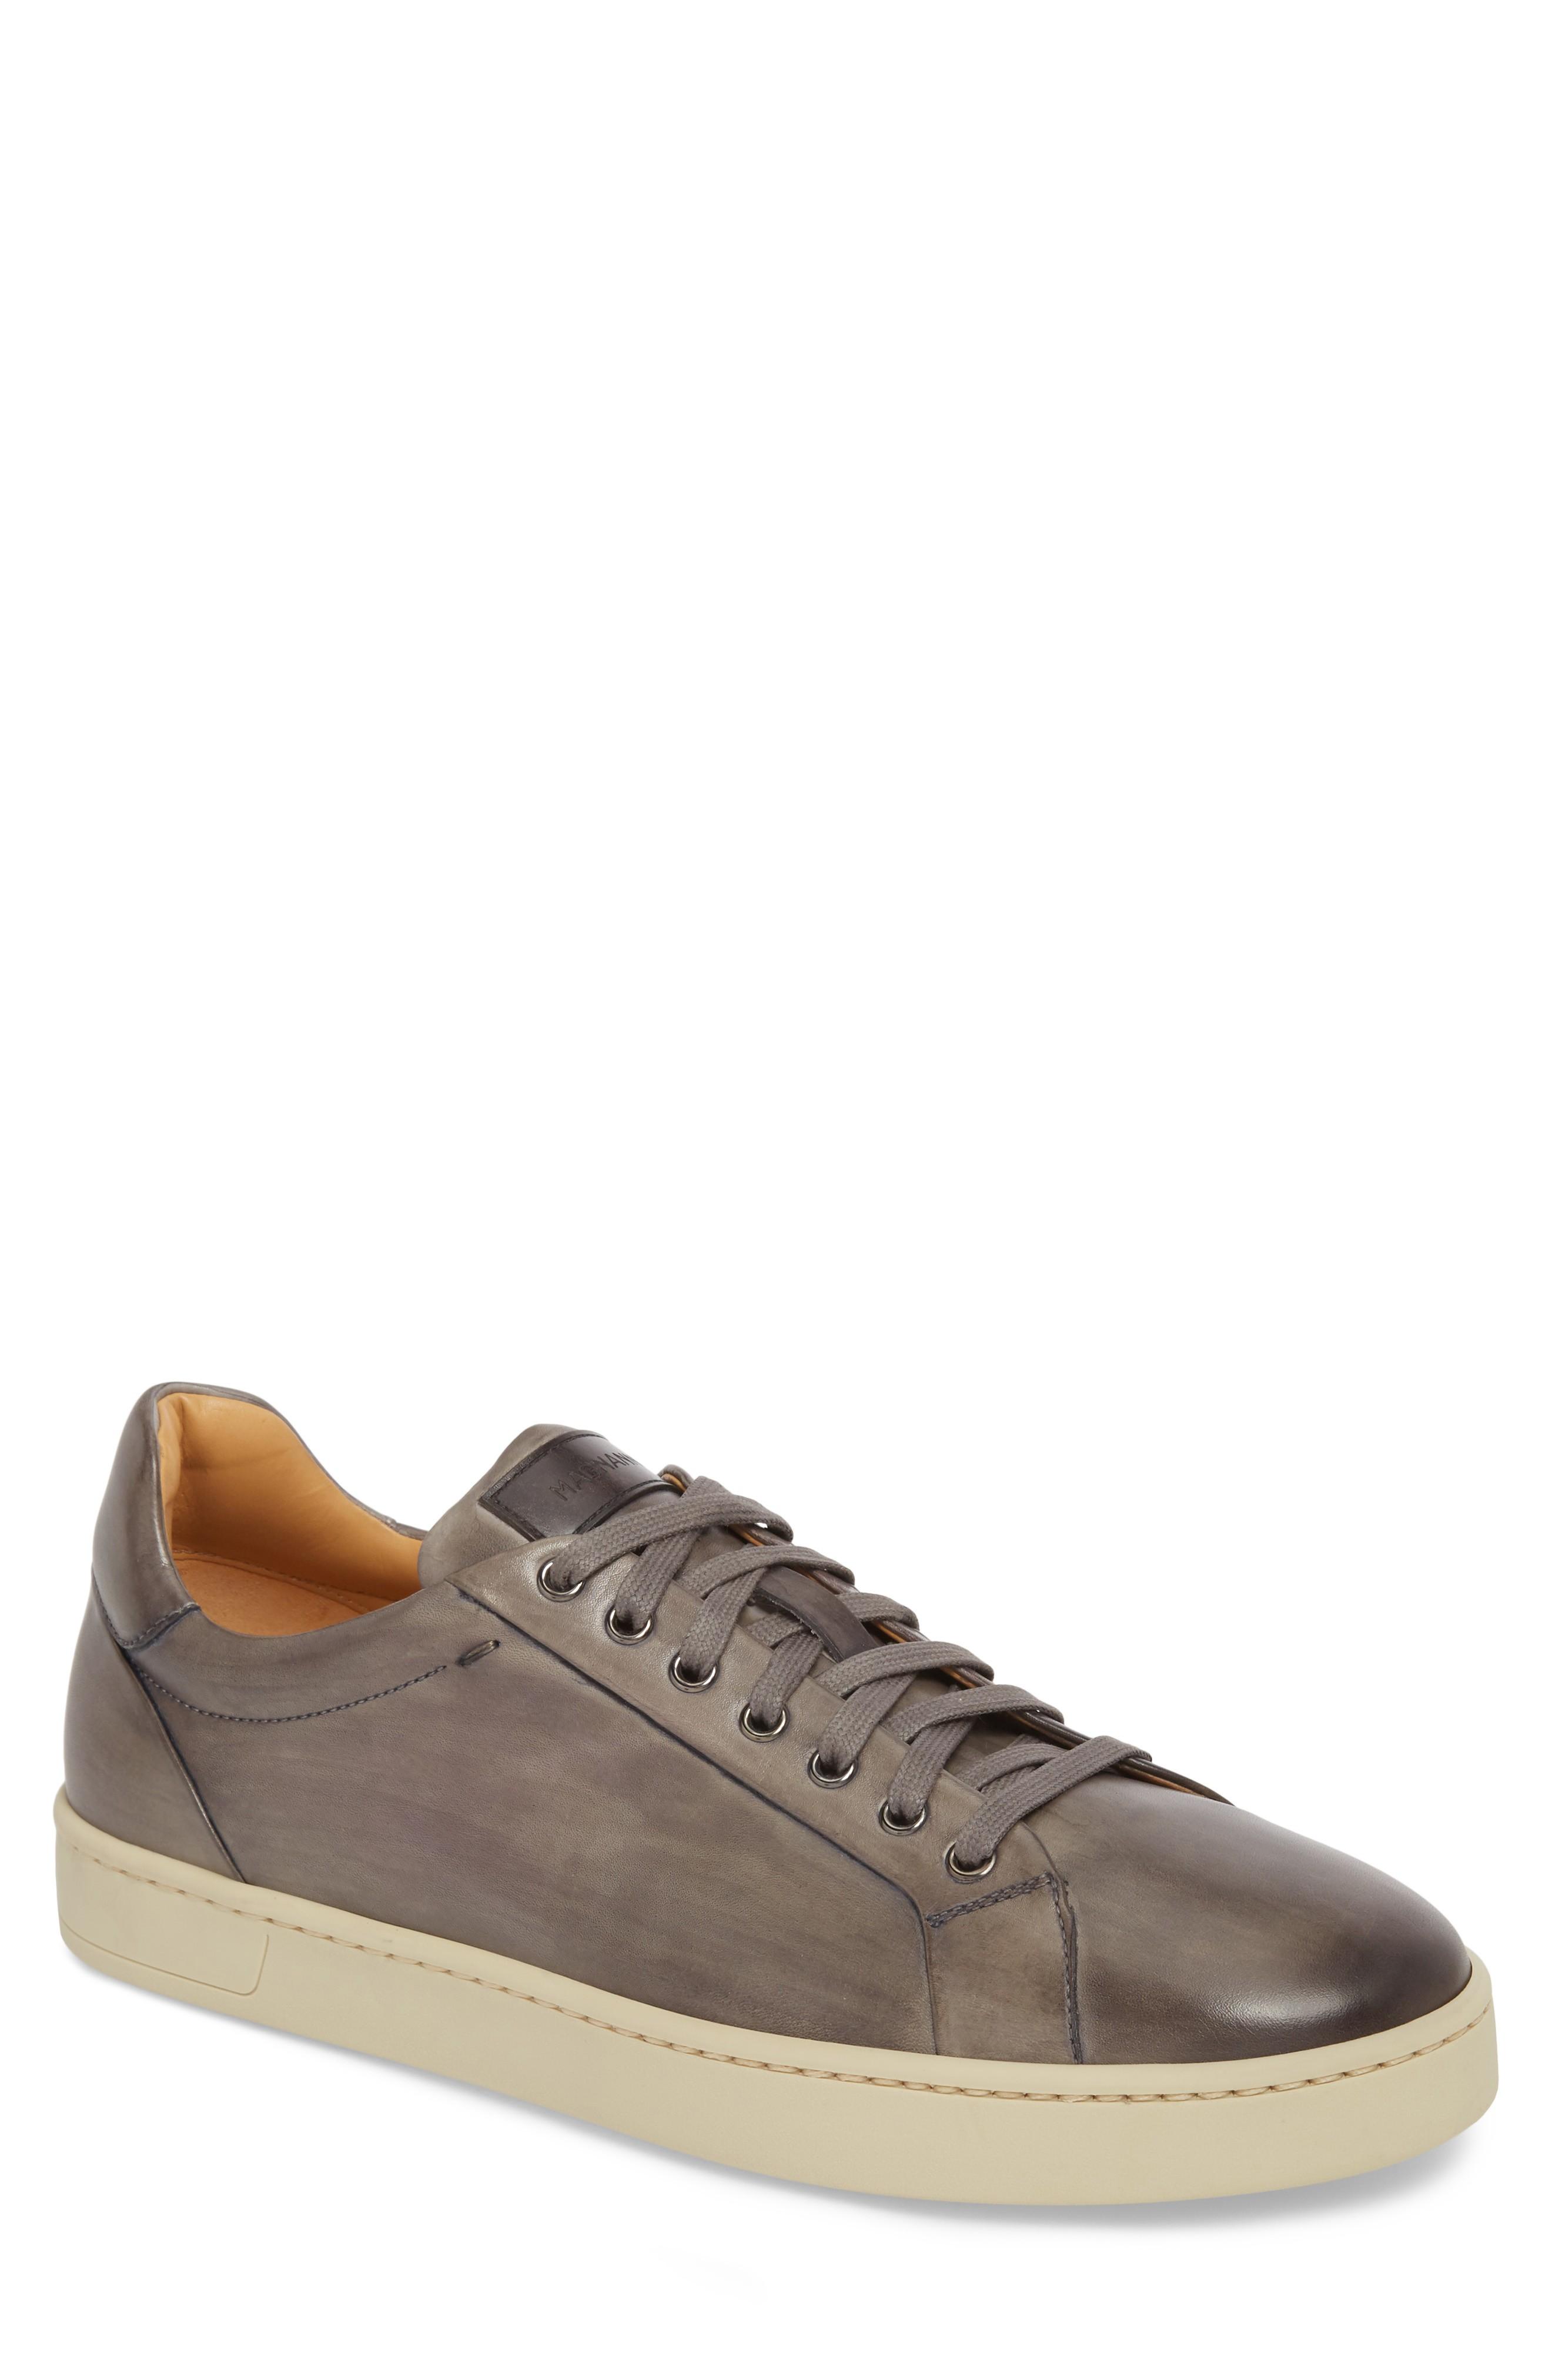 Magnanni Elonso Low Top Sneaker In Grey Leather | ModeSens